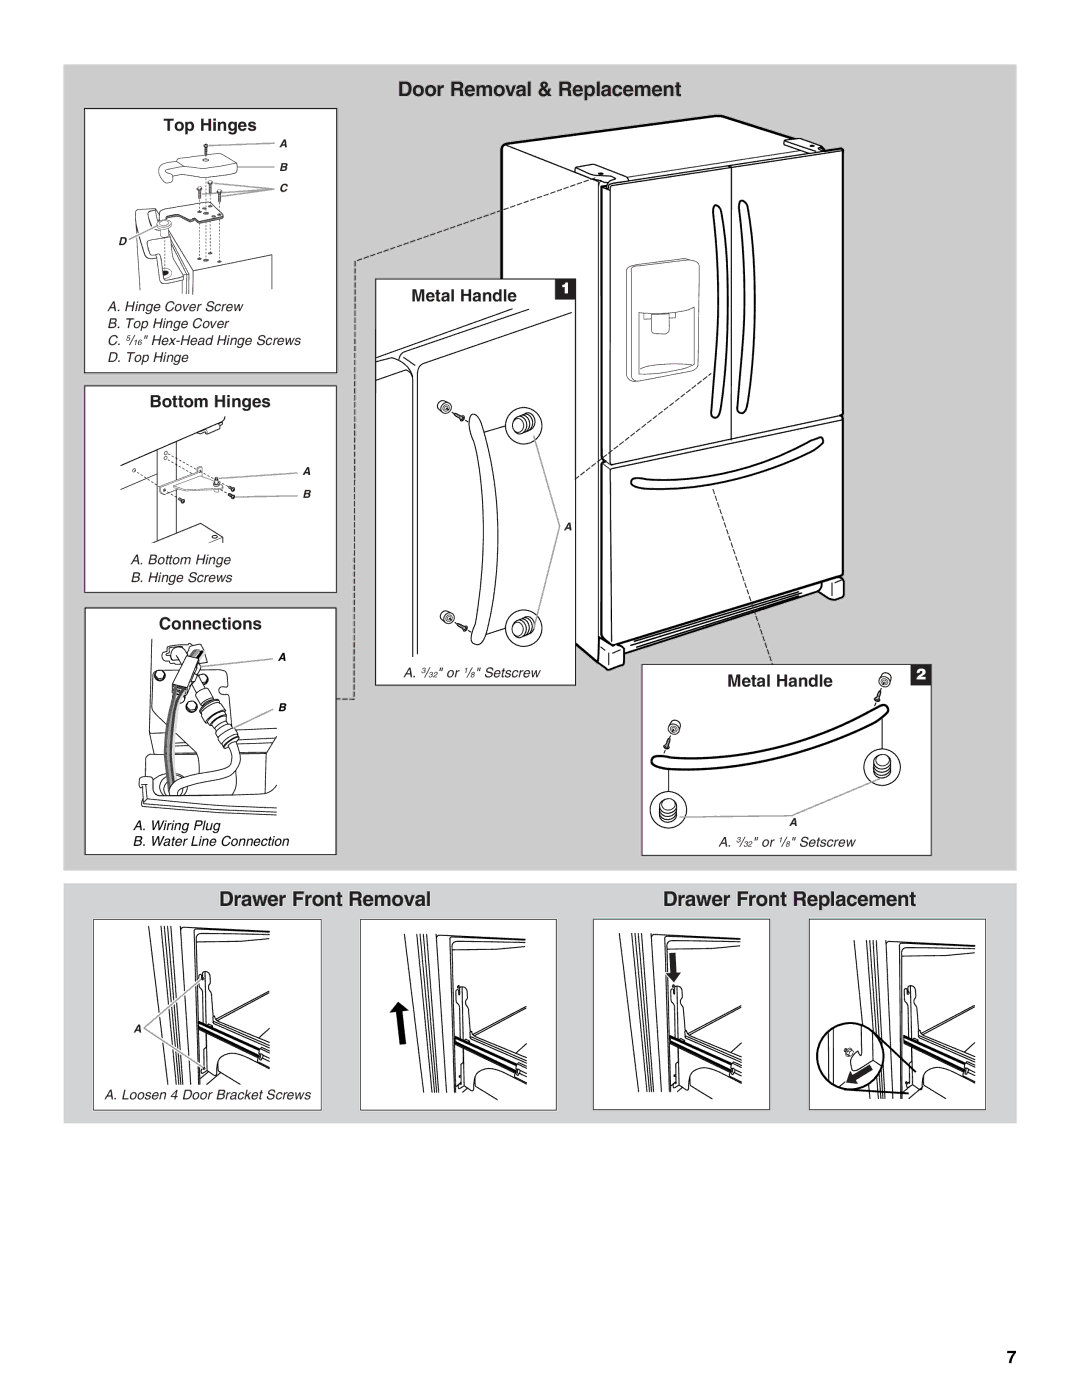 KitchenAid KFIS25XVMS9, UKF8001AXX-750 installation instructions Door Removal & Replacement 